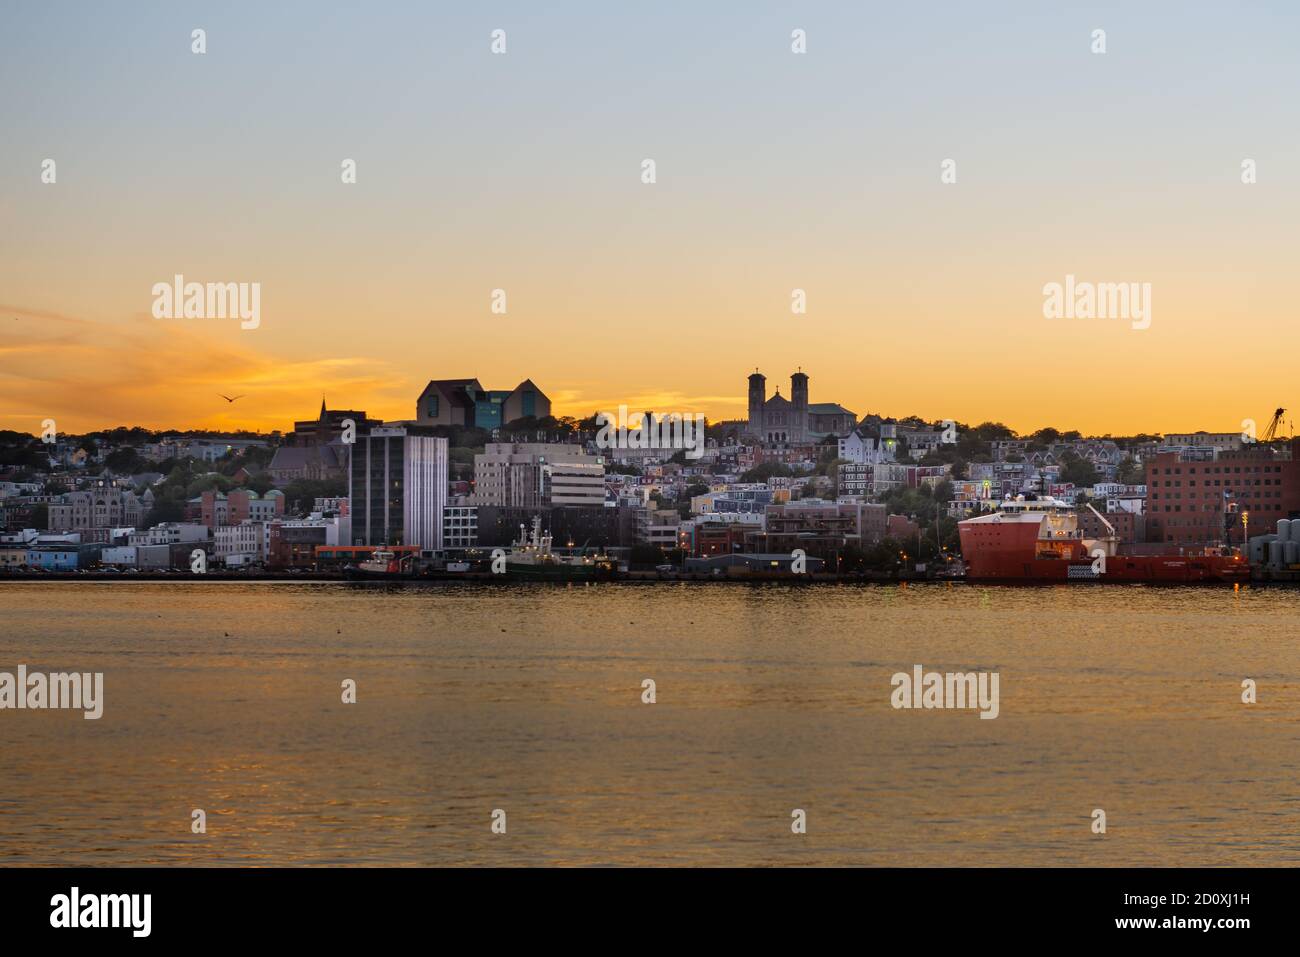 St. John's, Newfoundland, Canada  The sky turns orange as the sun sets behind the downtown area of St. John's with the ocean in the foreground. Stock Photo